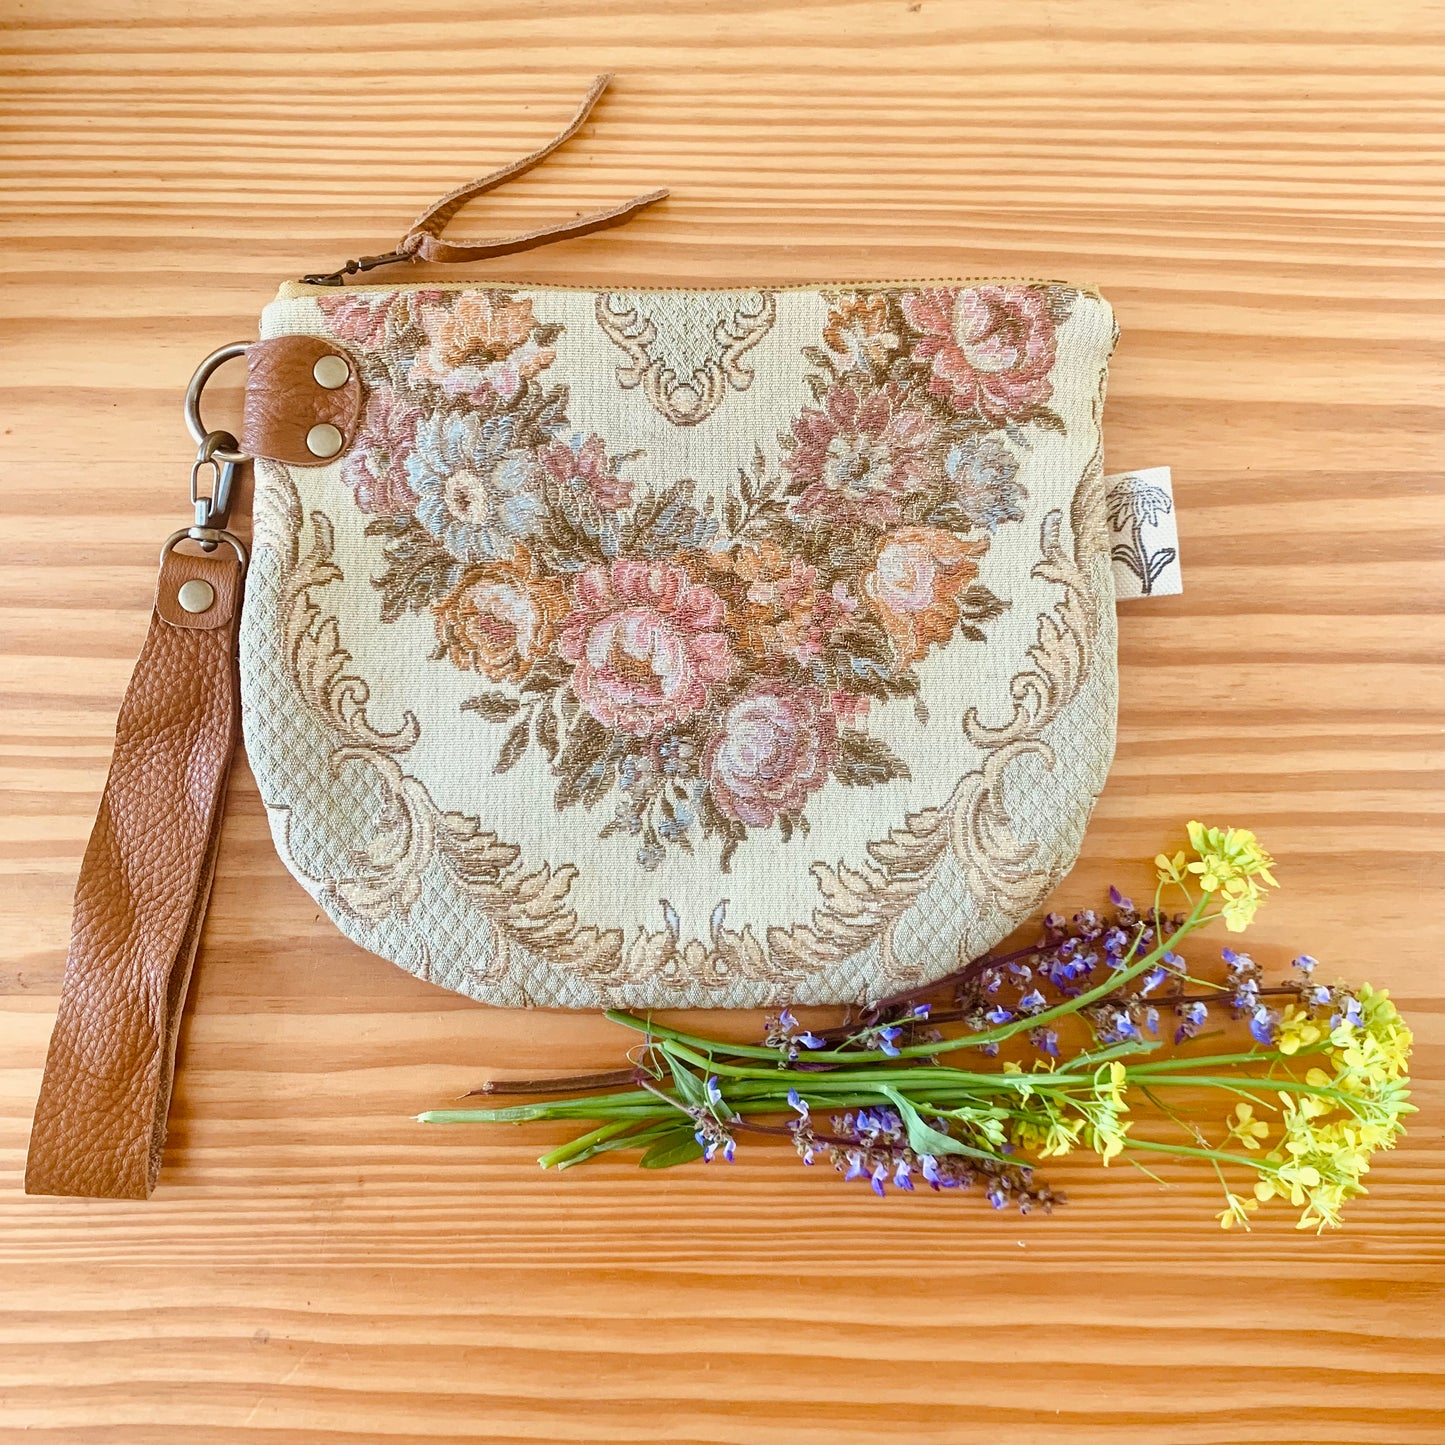 Tooled Leather purse / Mexican leather bag / Hand Tooled Leather Bag/  Mexican Handbag/ Carved Leather/Tooled Purse/ Tooled Flowers